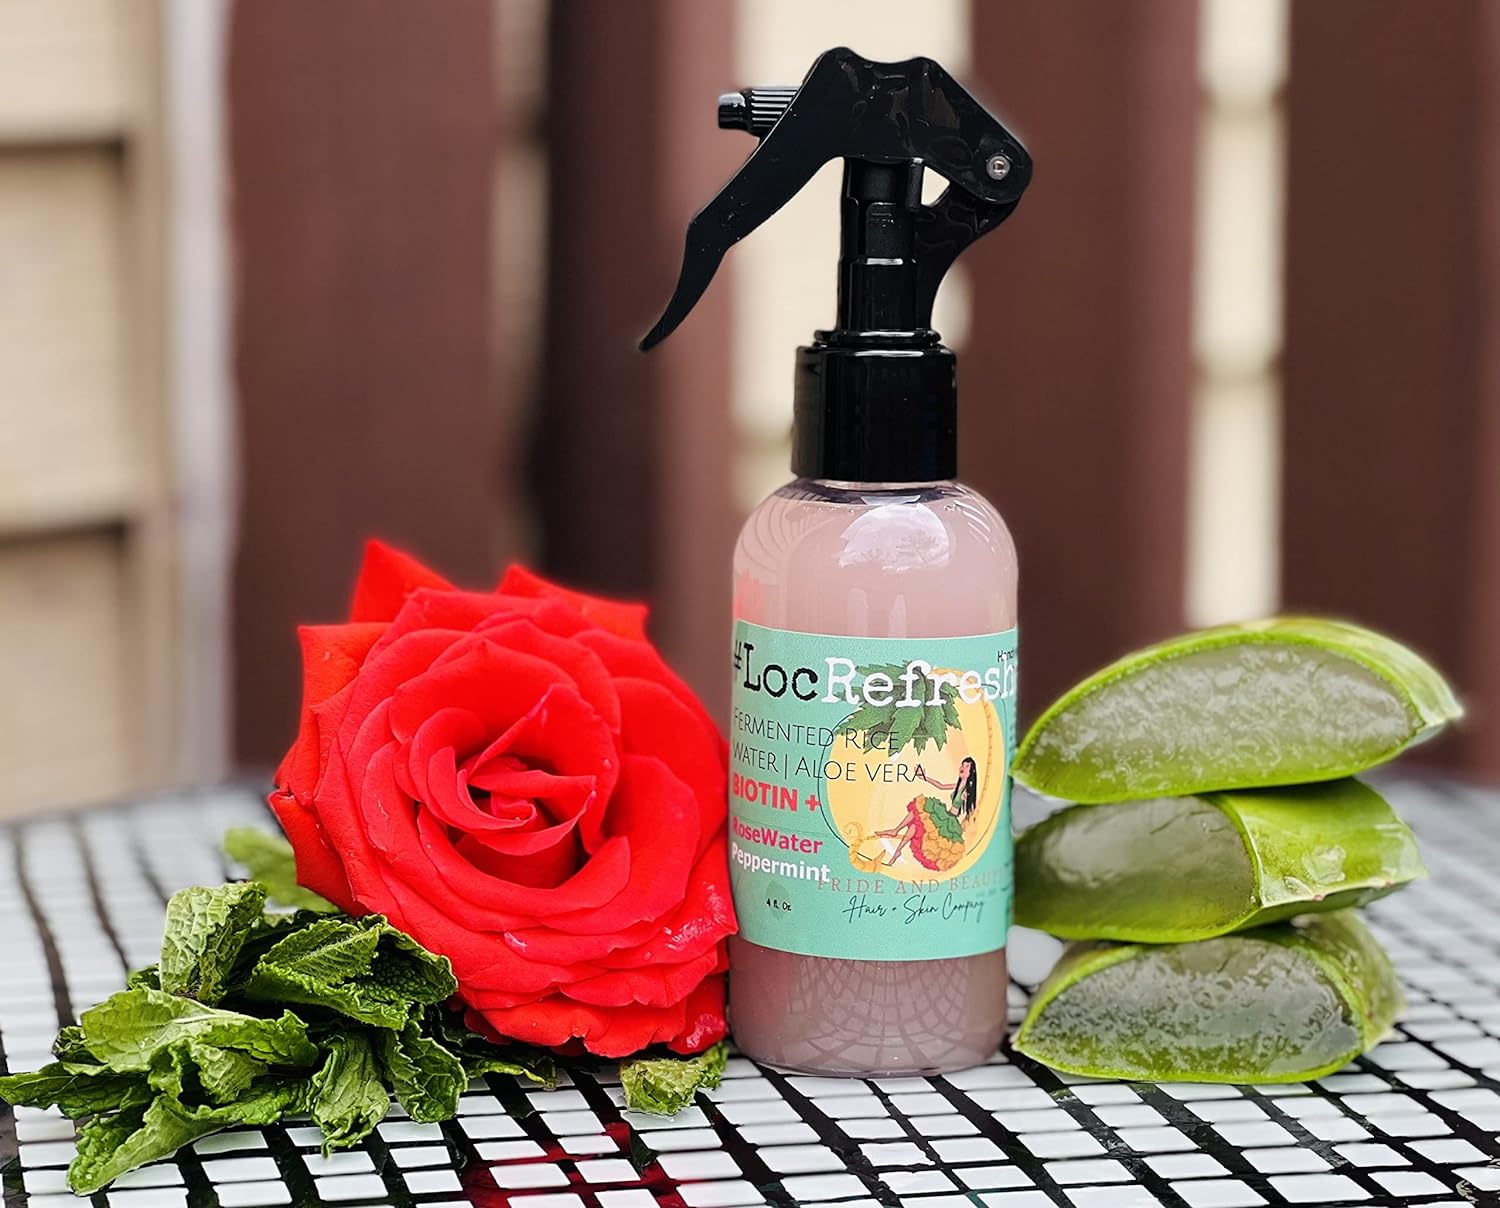 Rose Water For Locs, Daily Moisturizing Refreshing Spray, Rose Water For Hair, Rosewater and Peppermint Hair Scalp Moisturizer.